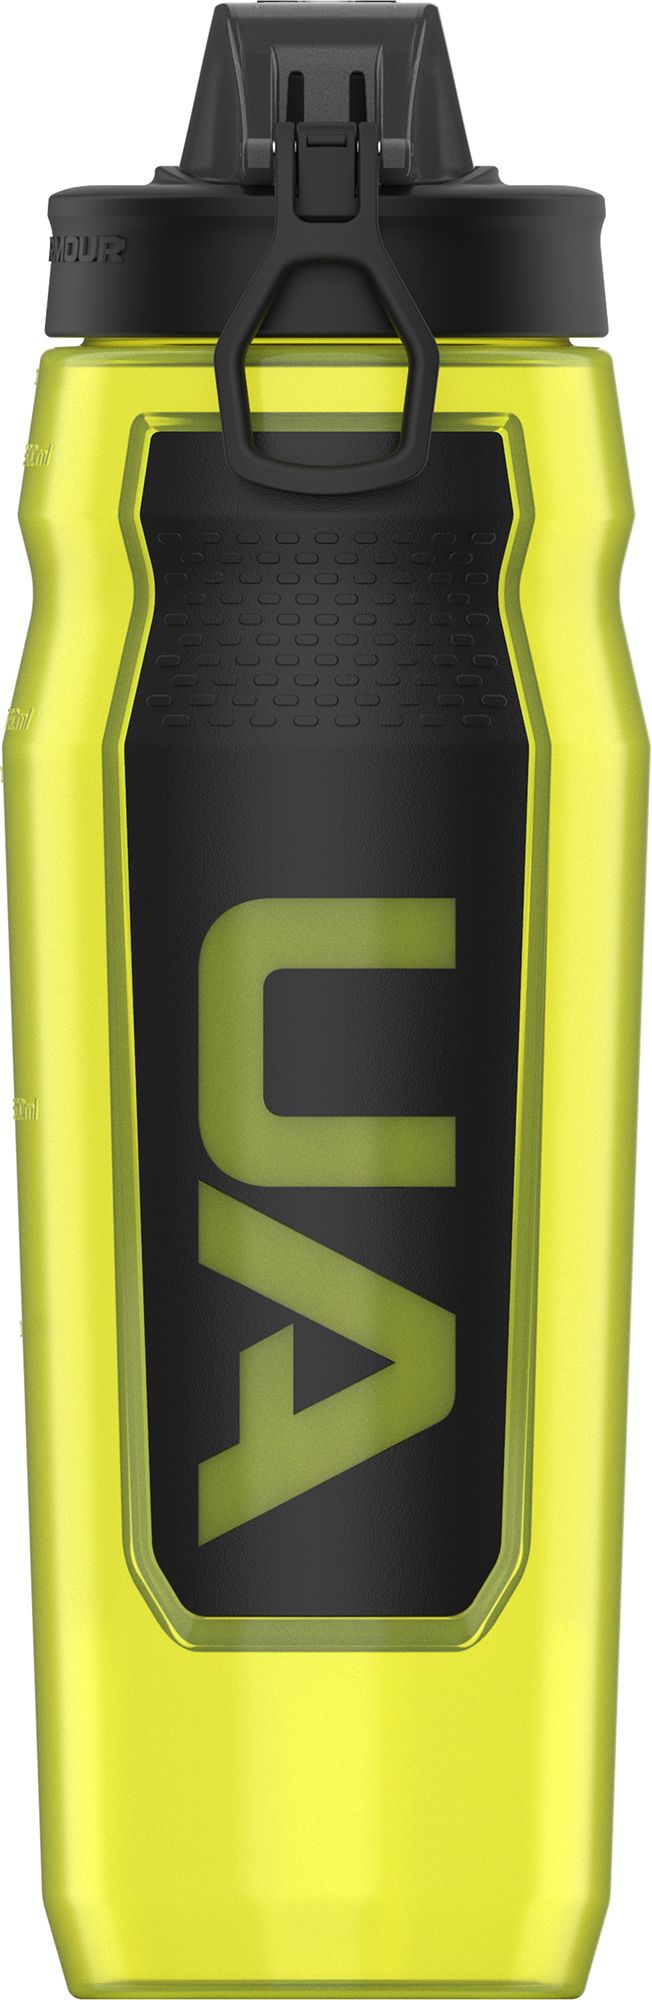 Gatorade Dining | Gatorade GX Serena Williams 30oz Water Bottle with Limited Edition Enamel Pin | Color: Pink/Yellow | Size: Os | Aprommm128's Closet